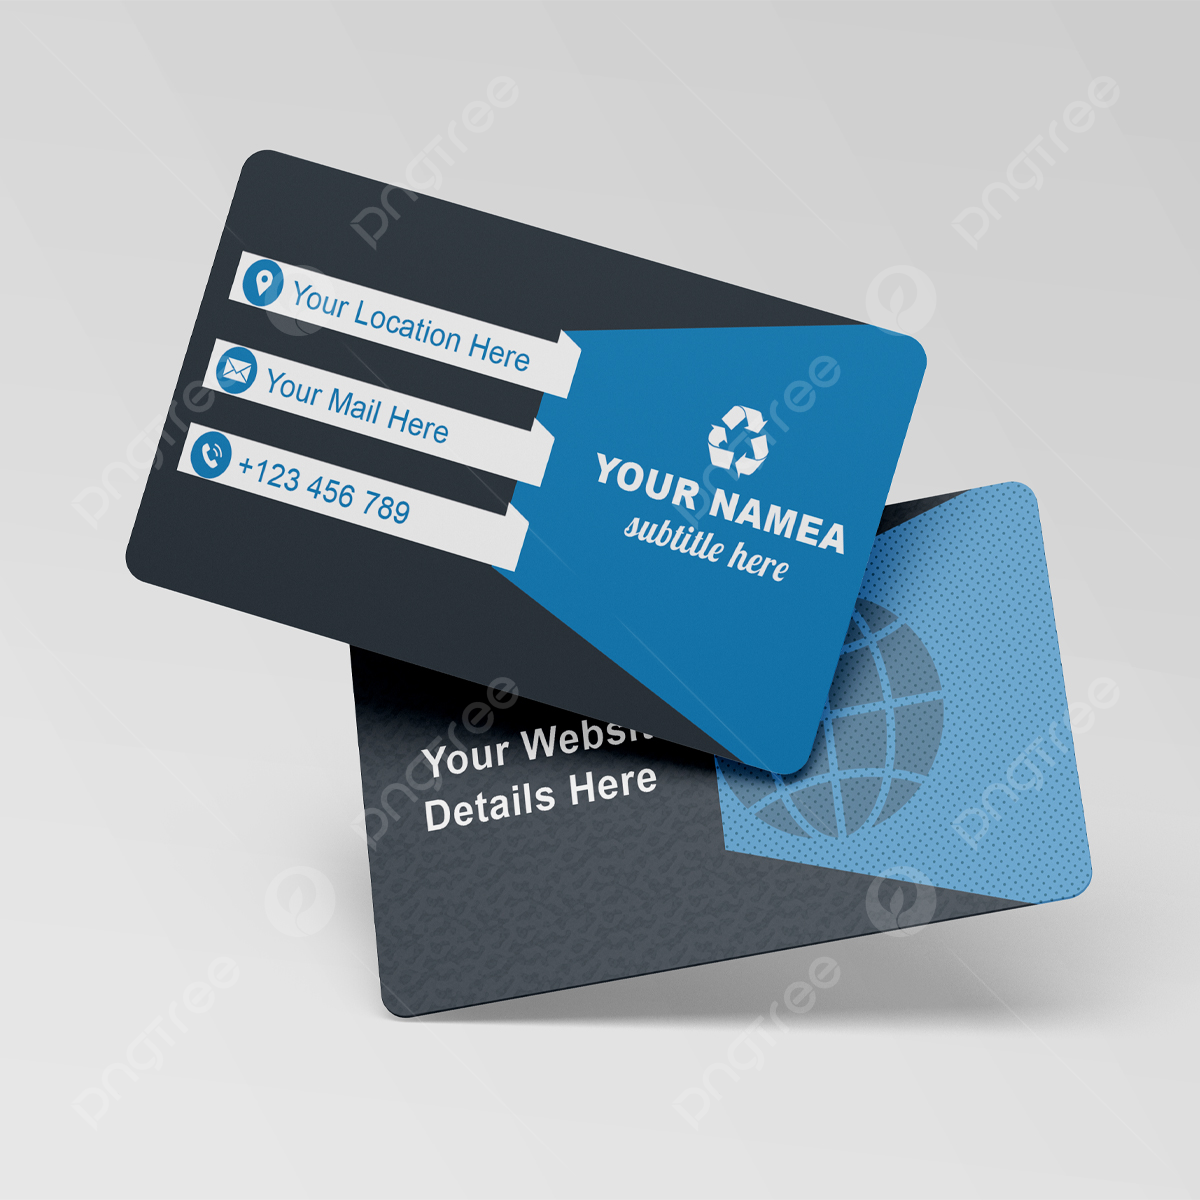 pngtree-3d-shape-texture-type-business-card-design-png-image_5148755